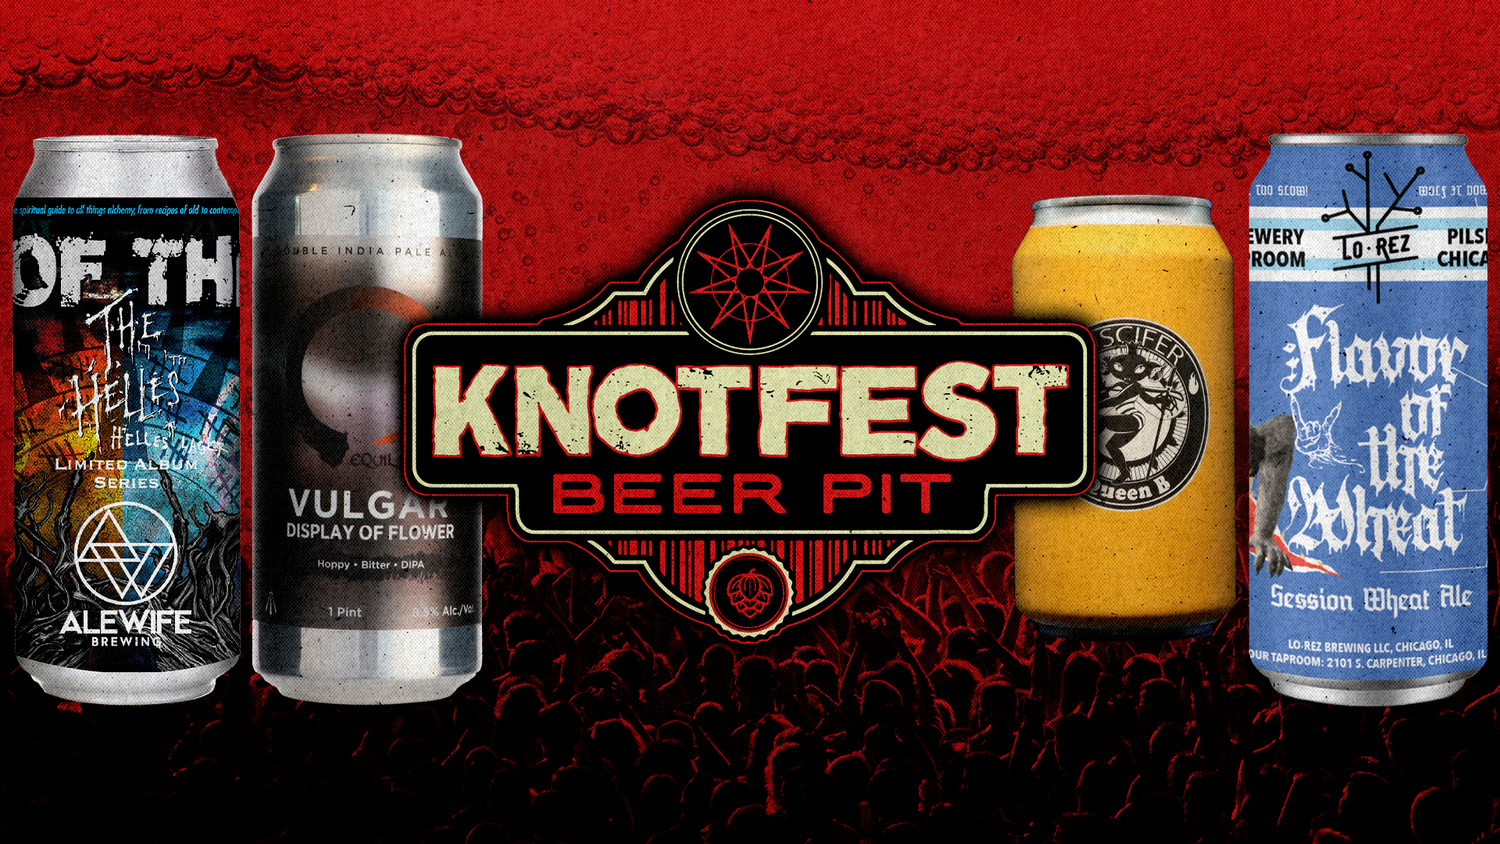 Heavy Cans - Introducing the August edition of the Knotfest Beer Pit